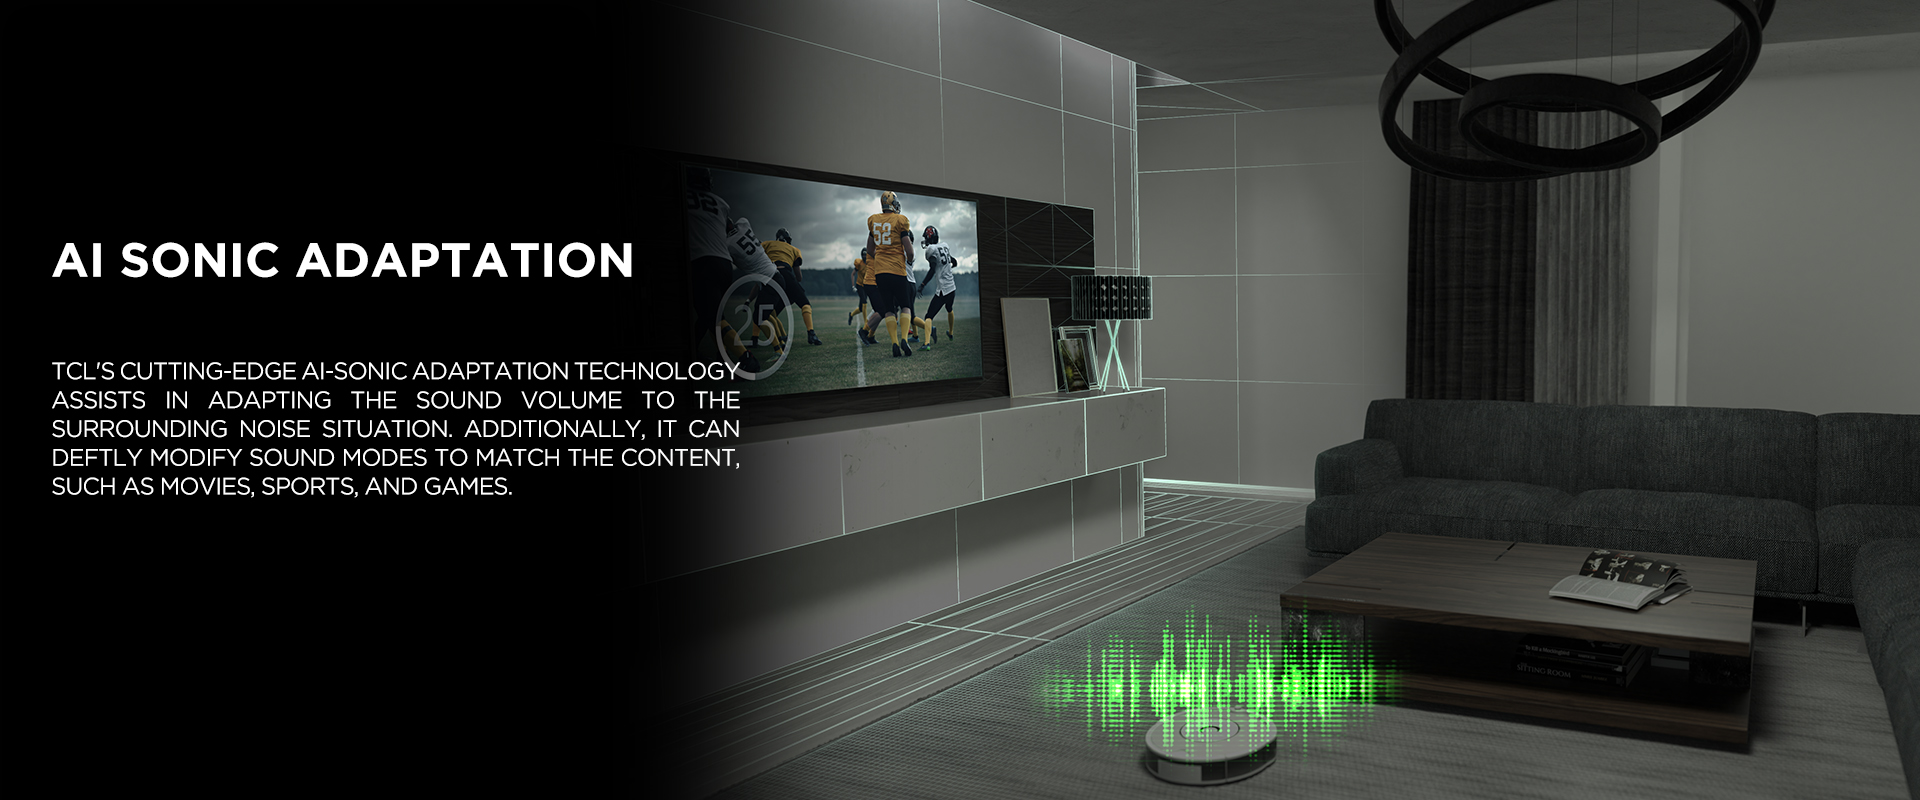 AI SONIC ADAPTATION - TCL's cutting-edge Ai-Sonic Adaptation technology assists in adapting the sound volume to the surrounding noise situation. Additionally, it can?ÿdeftly modify sound modes to match the content, such as movies, sports, and games.